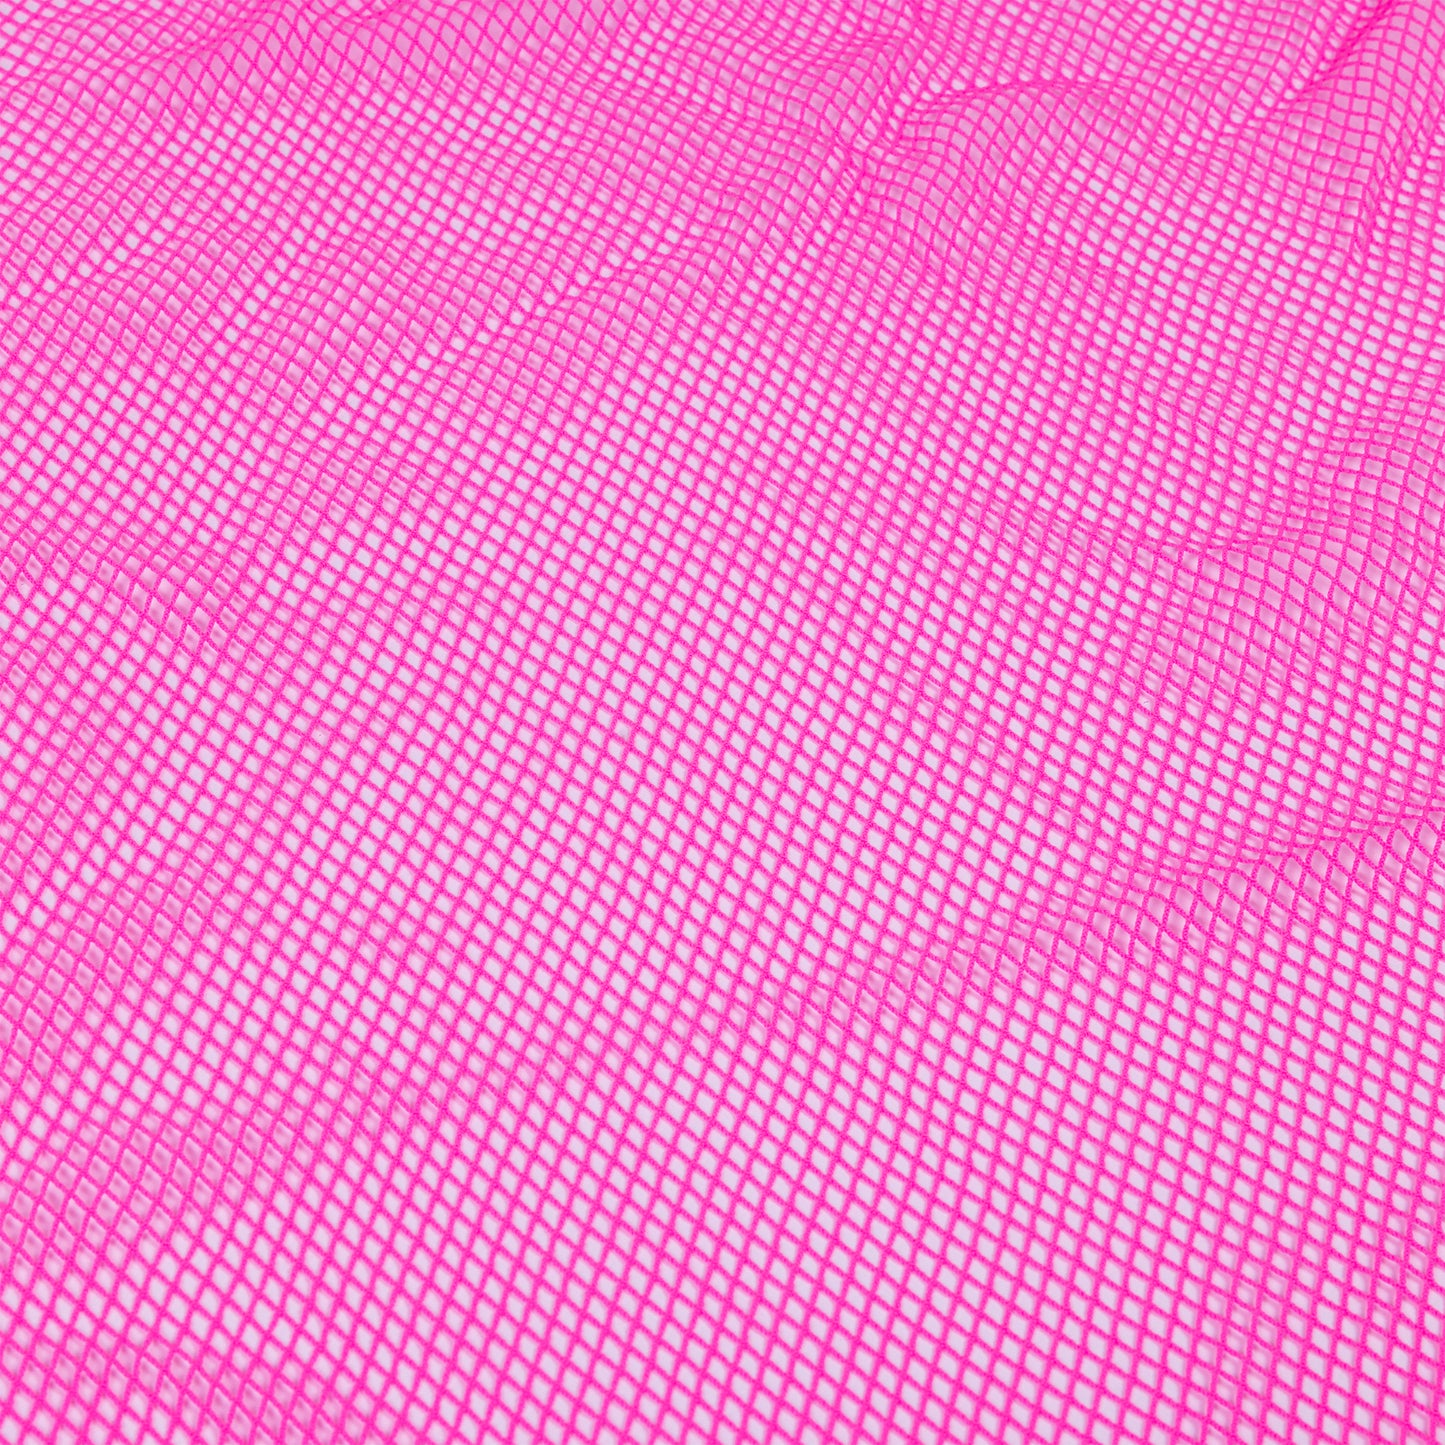 A bright pink Barbie 90's fishnet fabric for fun crafting and making costumes